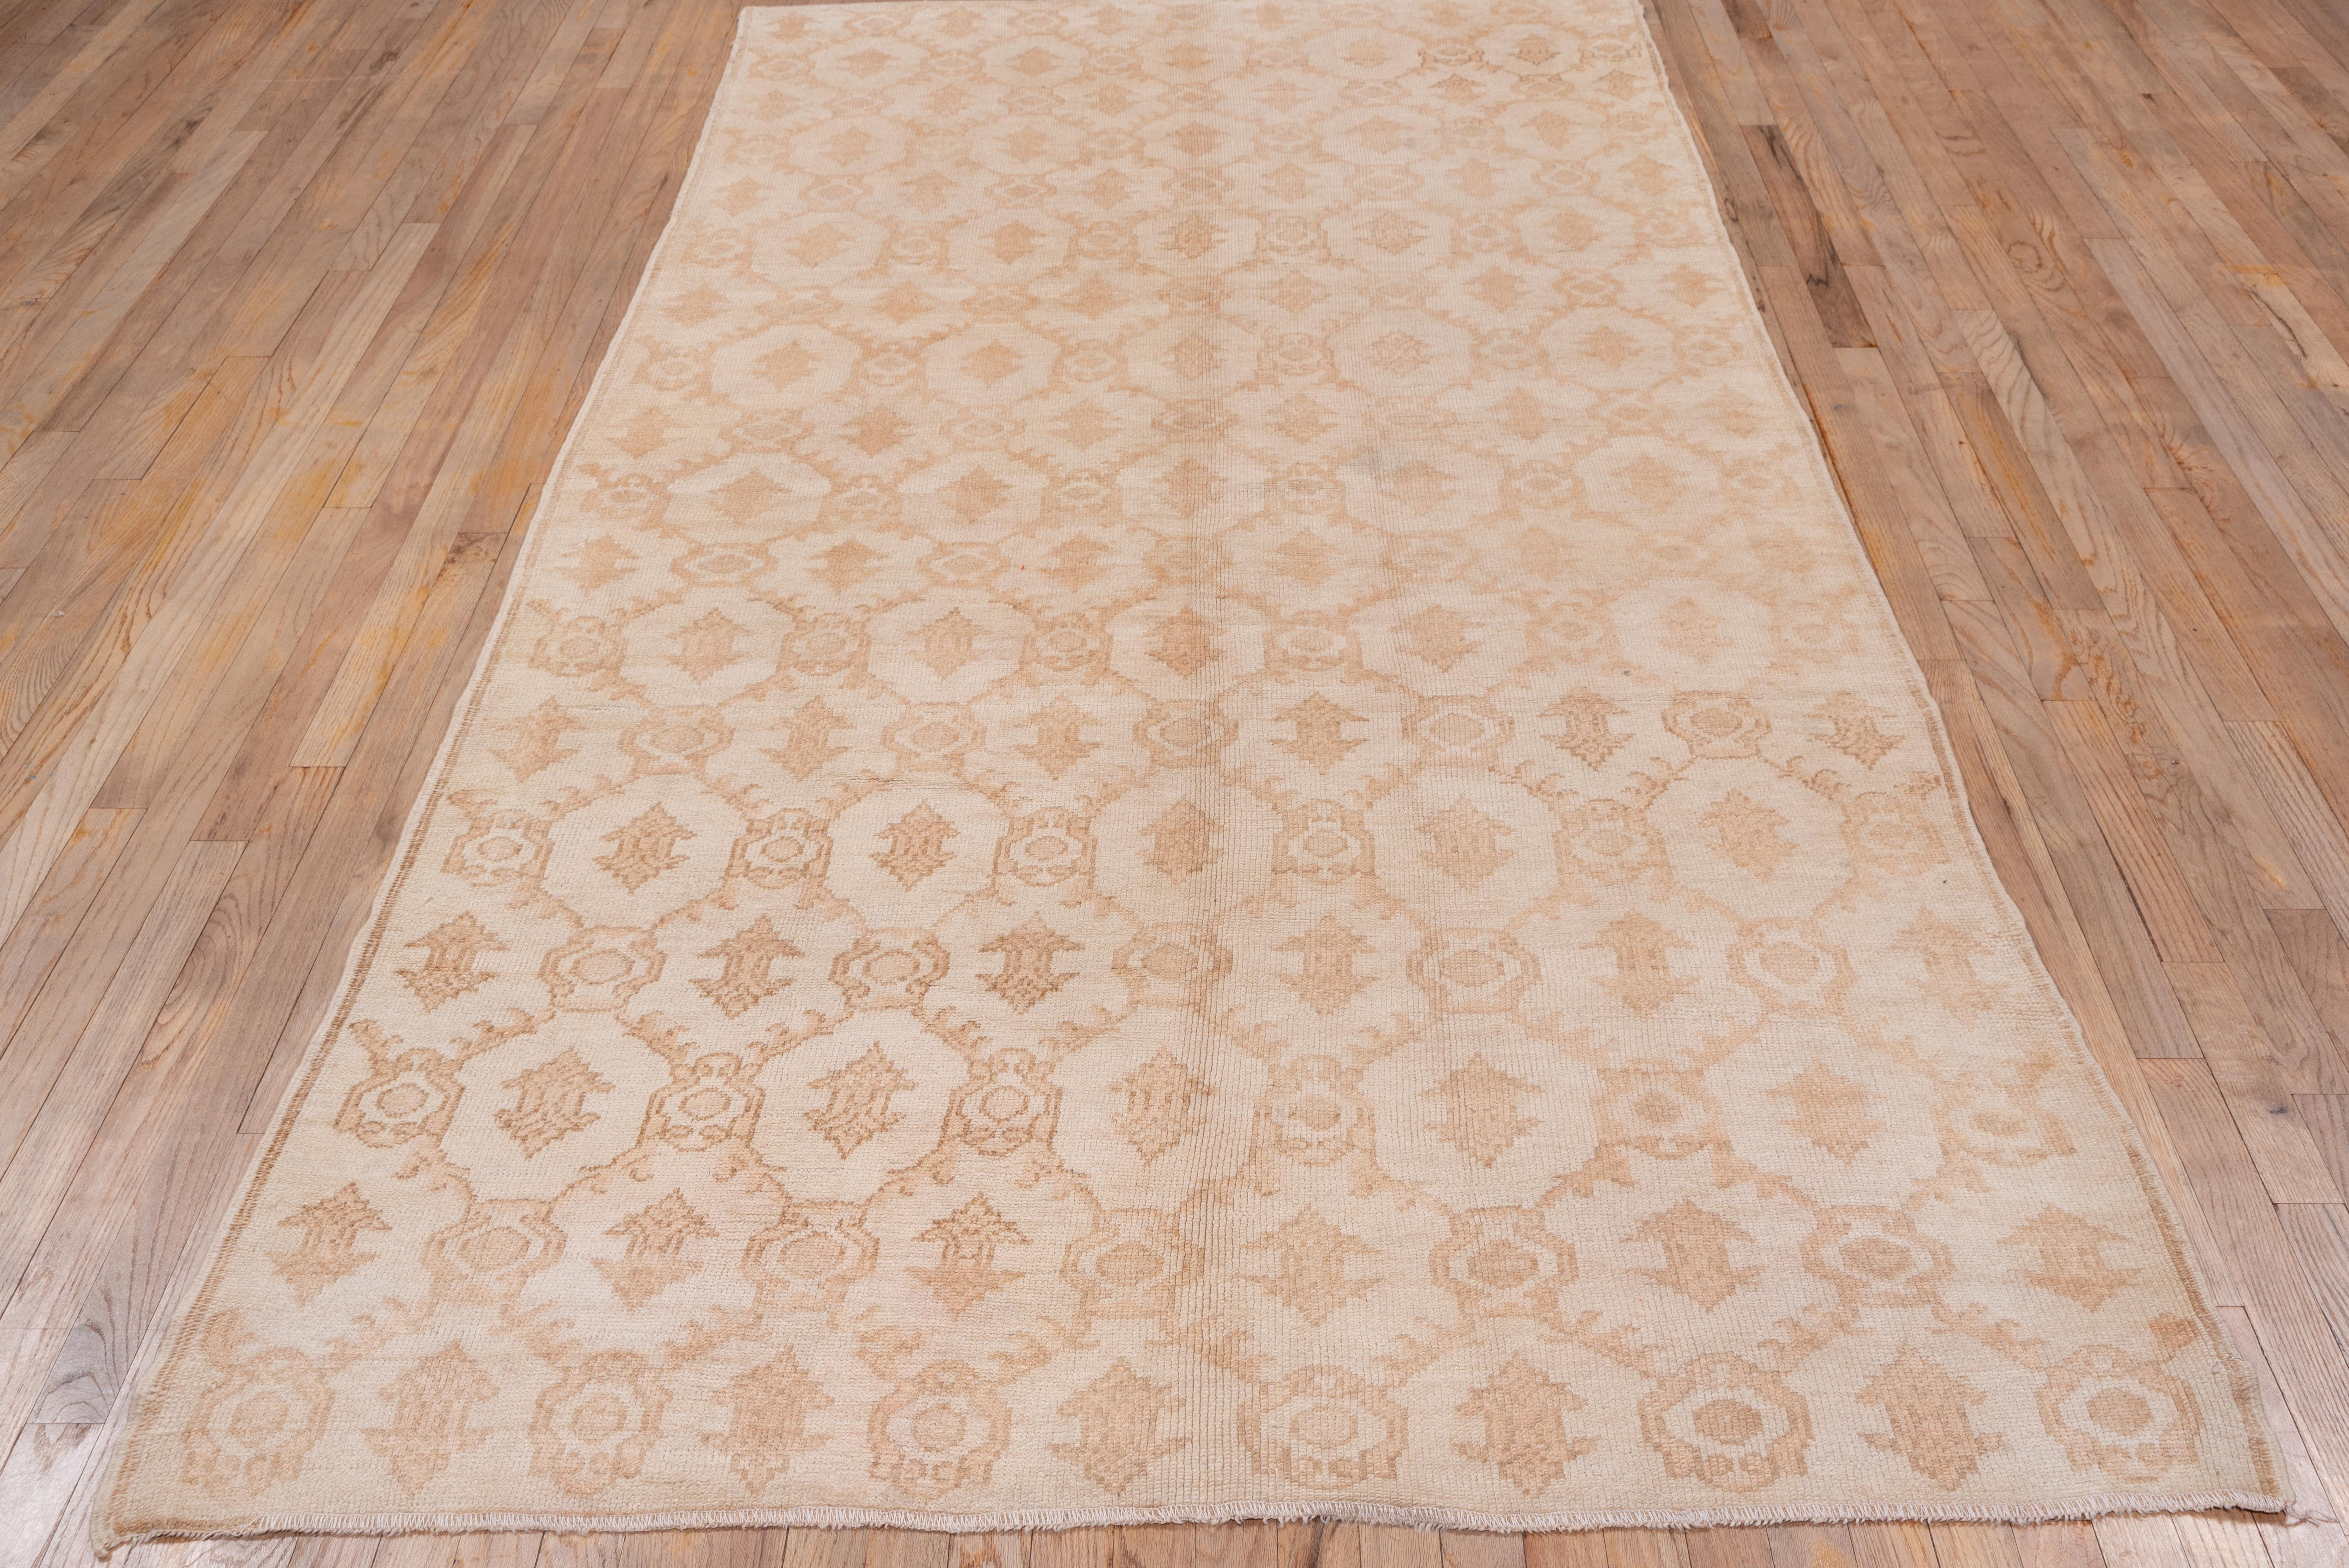 Mid-20th Century Turkish Konya Gallery Carpet, Neutral Tones, Soft Palette In Good Condition For Sale In New York, NY